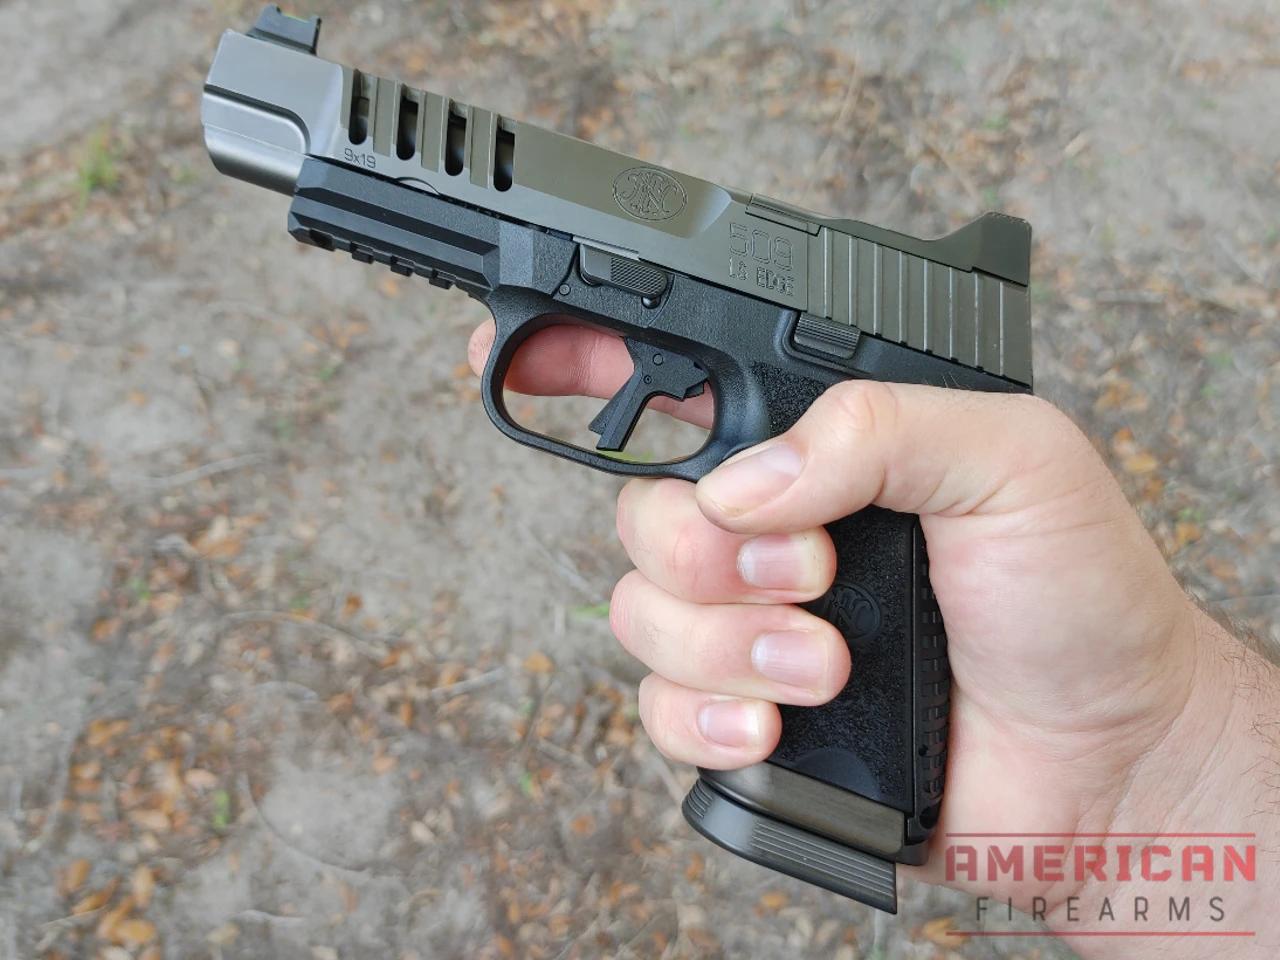 FN's 509 series has a variant for almost every use case, with everything from a 509 Compact carry model to this 509 LS Edge, which is a full size, competition-focused version of the pistol.